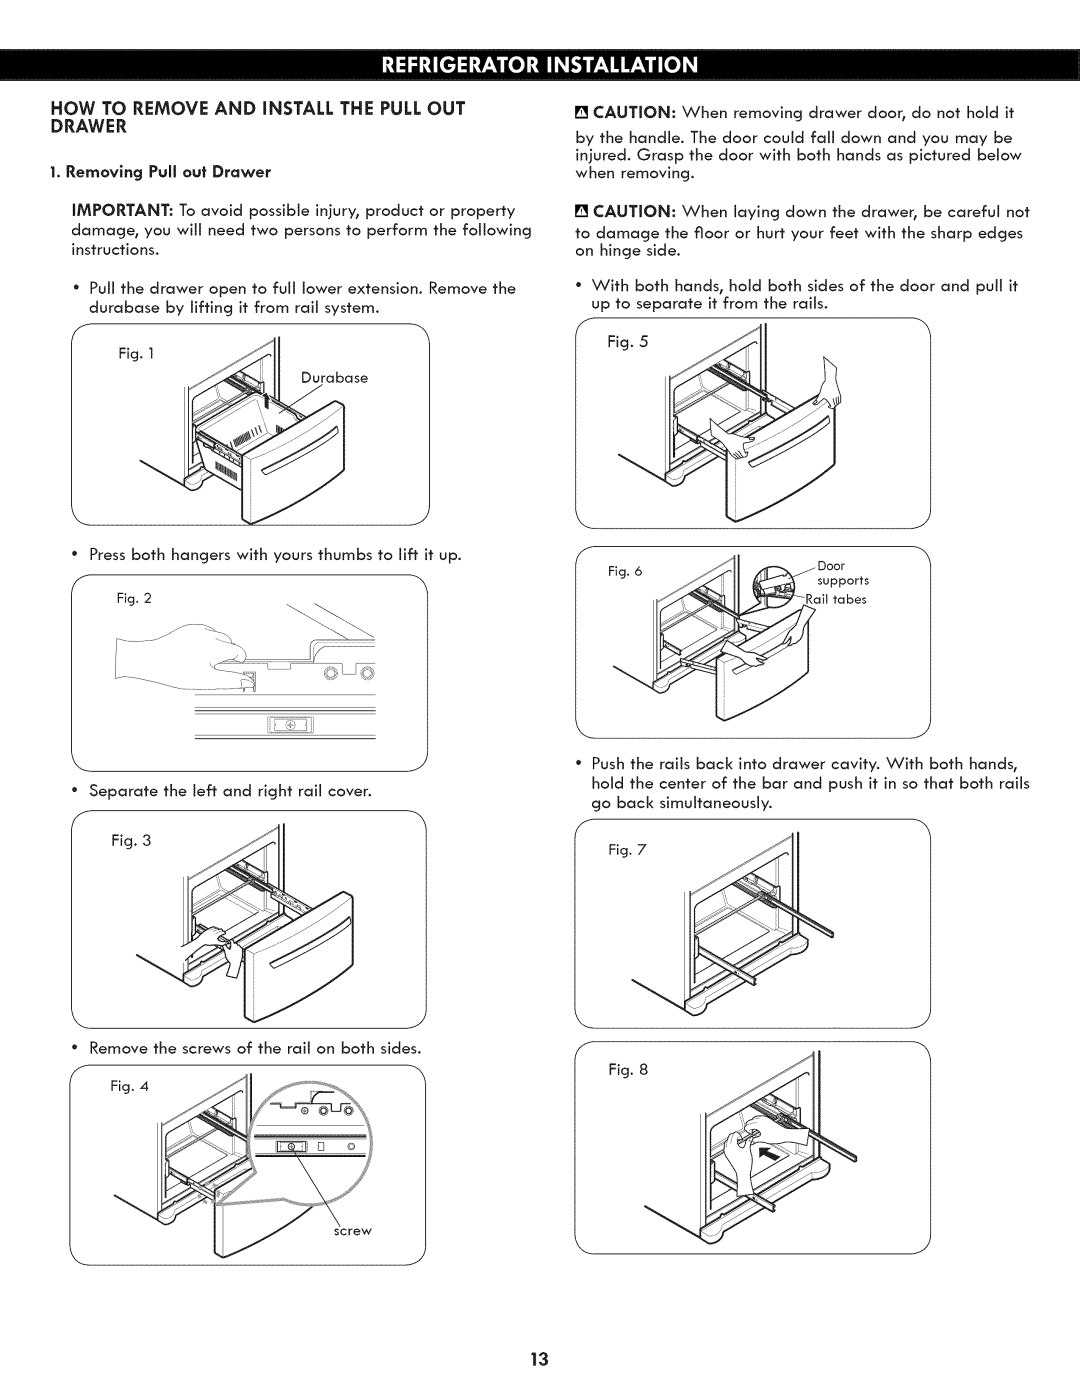 Kenmore 795.7130 manual HOW TO REMOVE AND iNSTALL THE PULL OUT DRAWER, Removing Pull out Drawer 